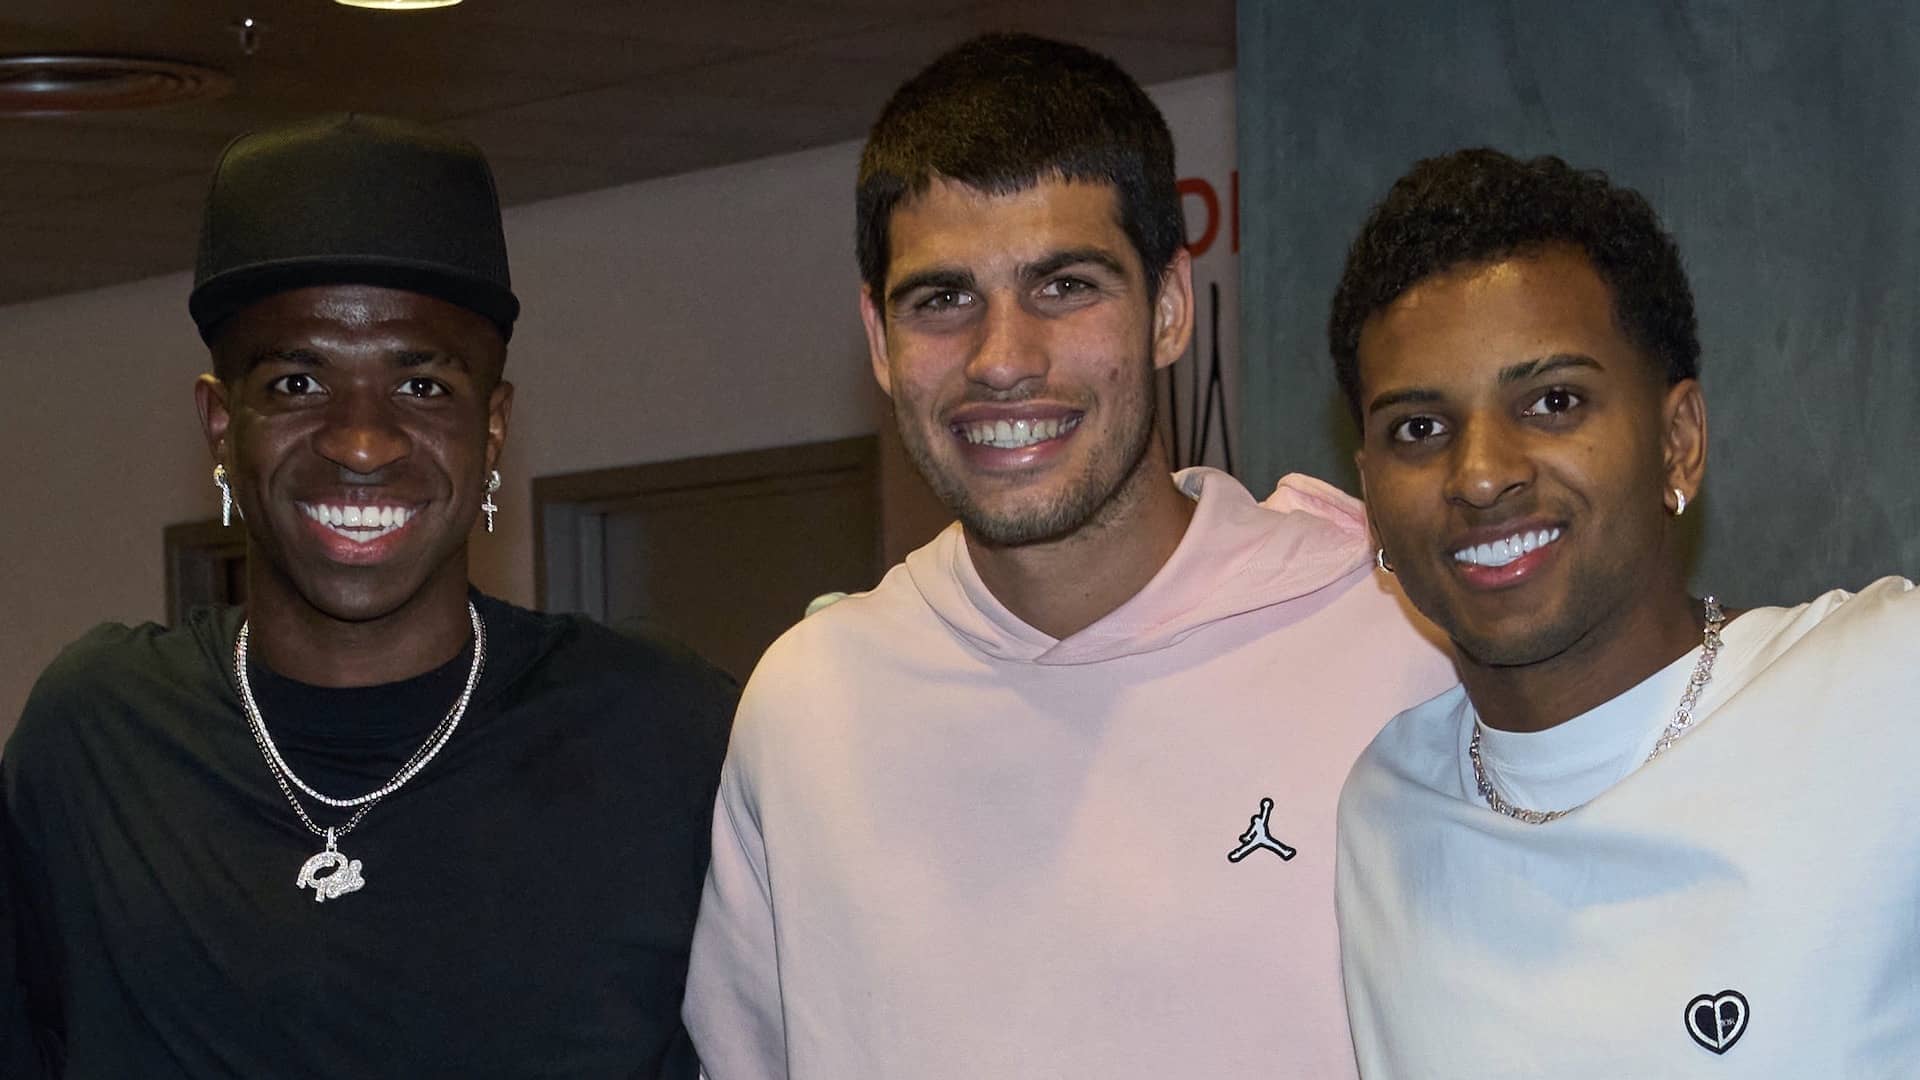 Vinicius Junior and Rodrygo of Real Madrid meet with Carlos Alcaraz after his win on Sunday.